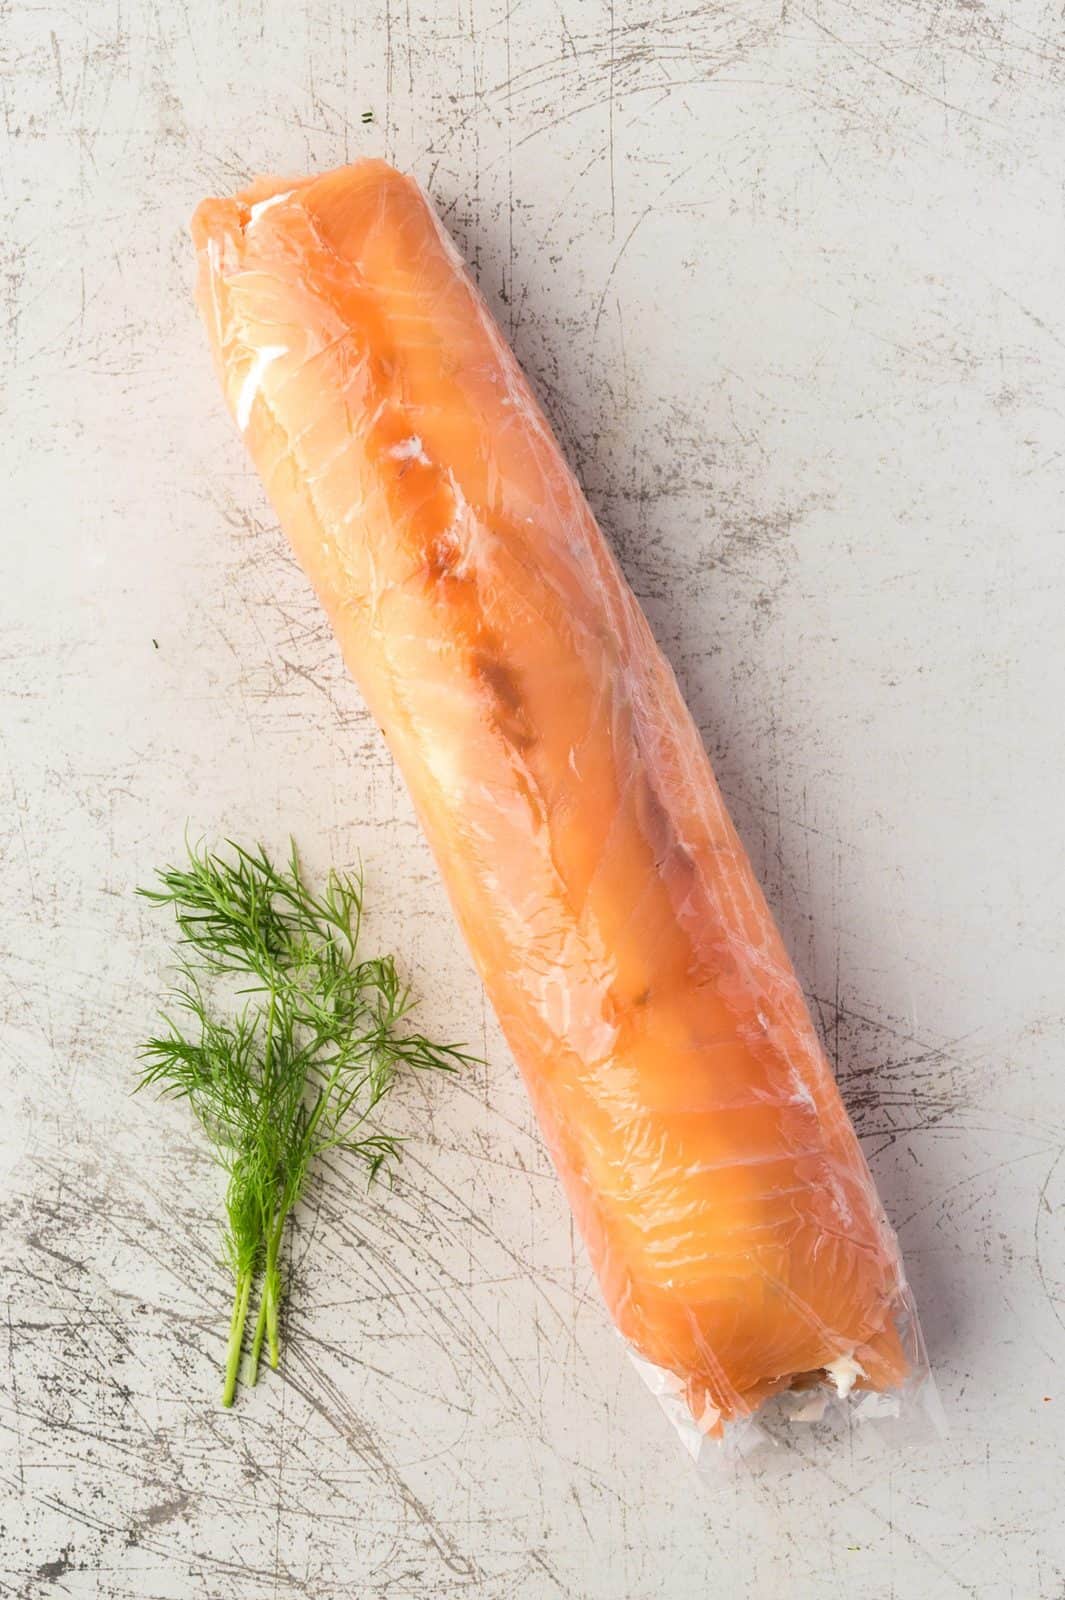 Rolled up salmon wrapped in plastic wrap.